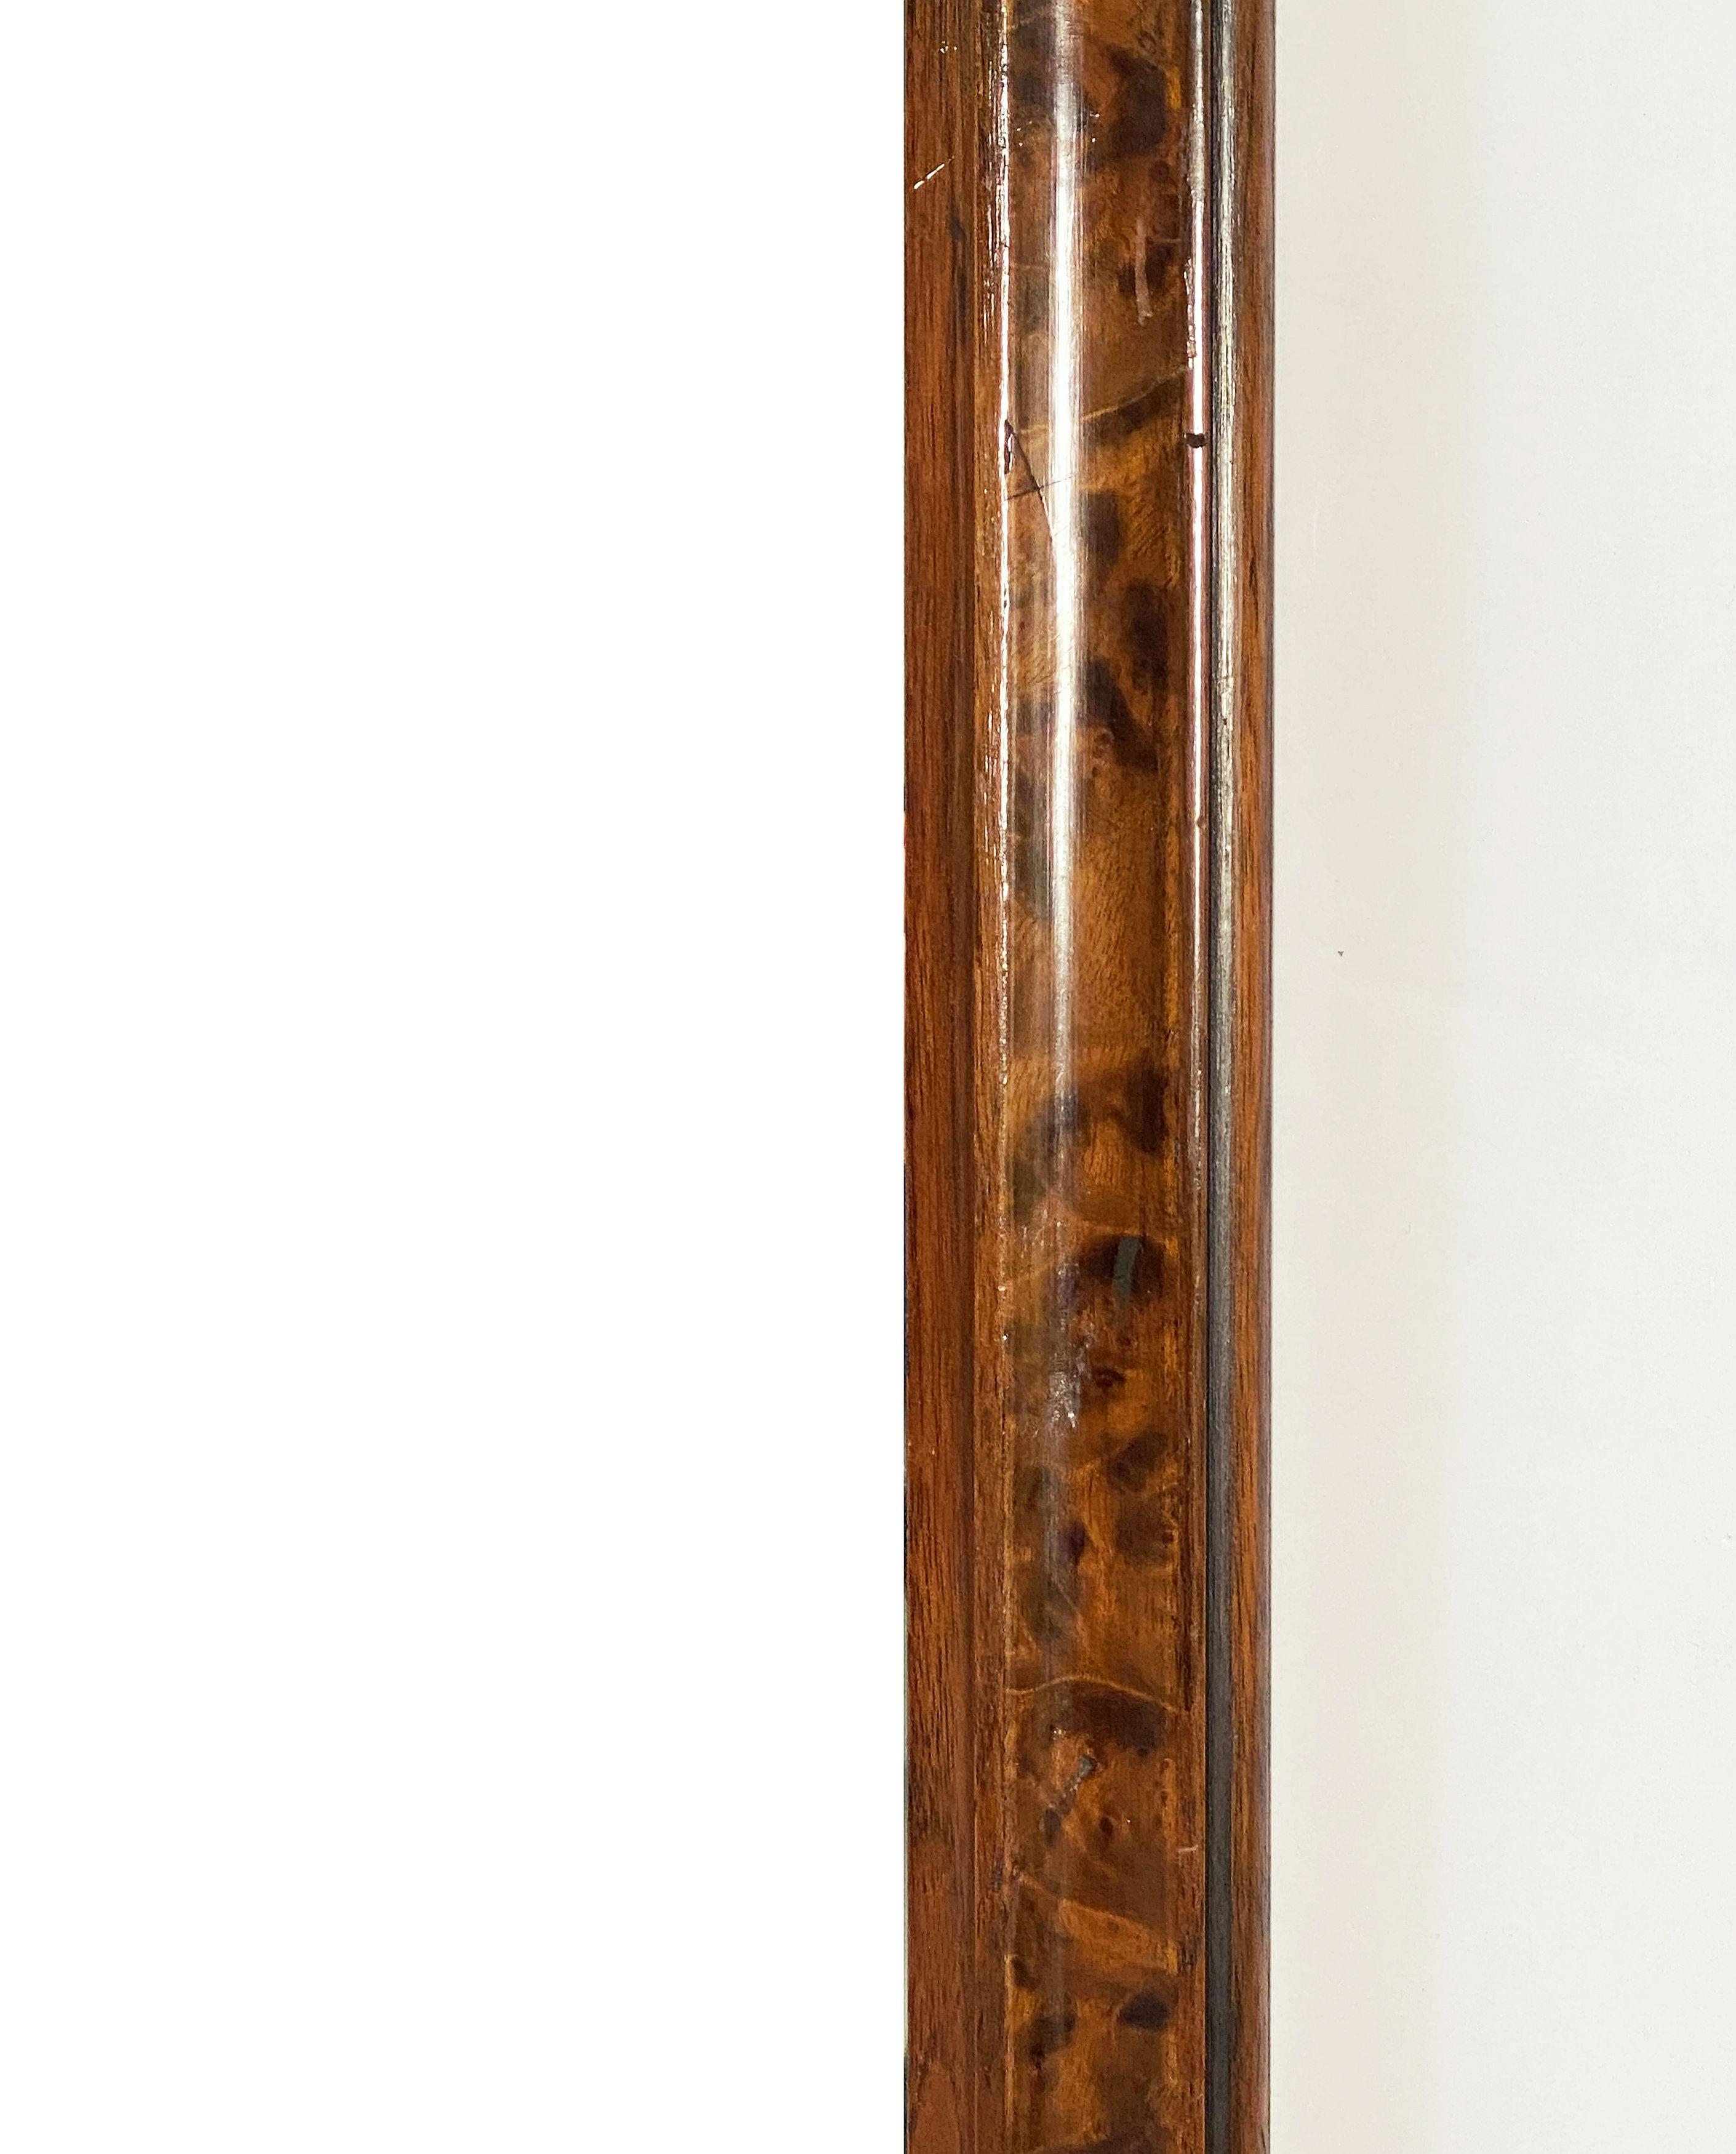 English Rectangular Mirror in Carved Frame of Walnut (H 33 3/8 x W 21) For Sale 7